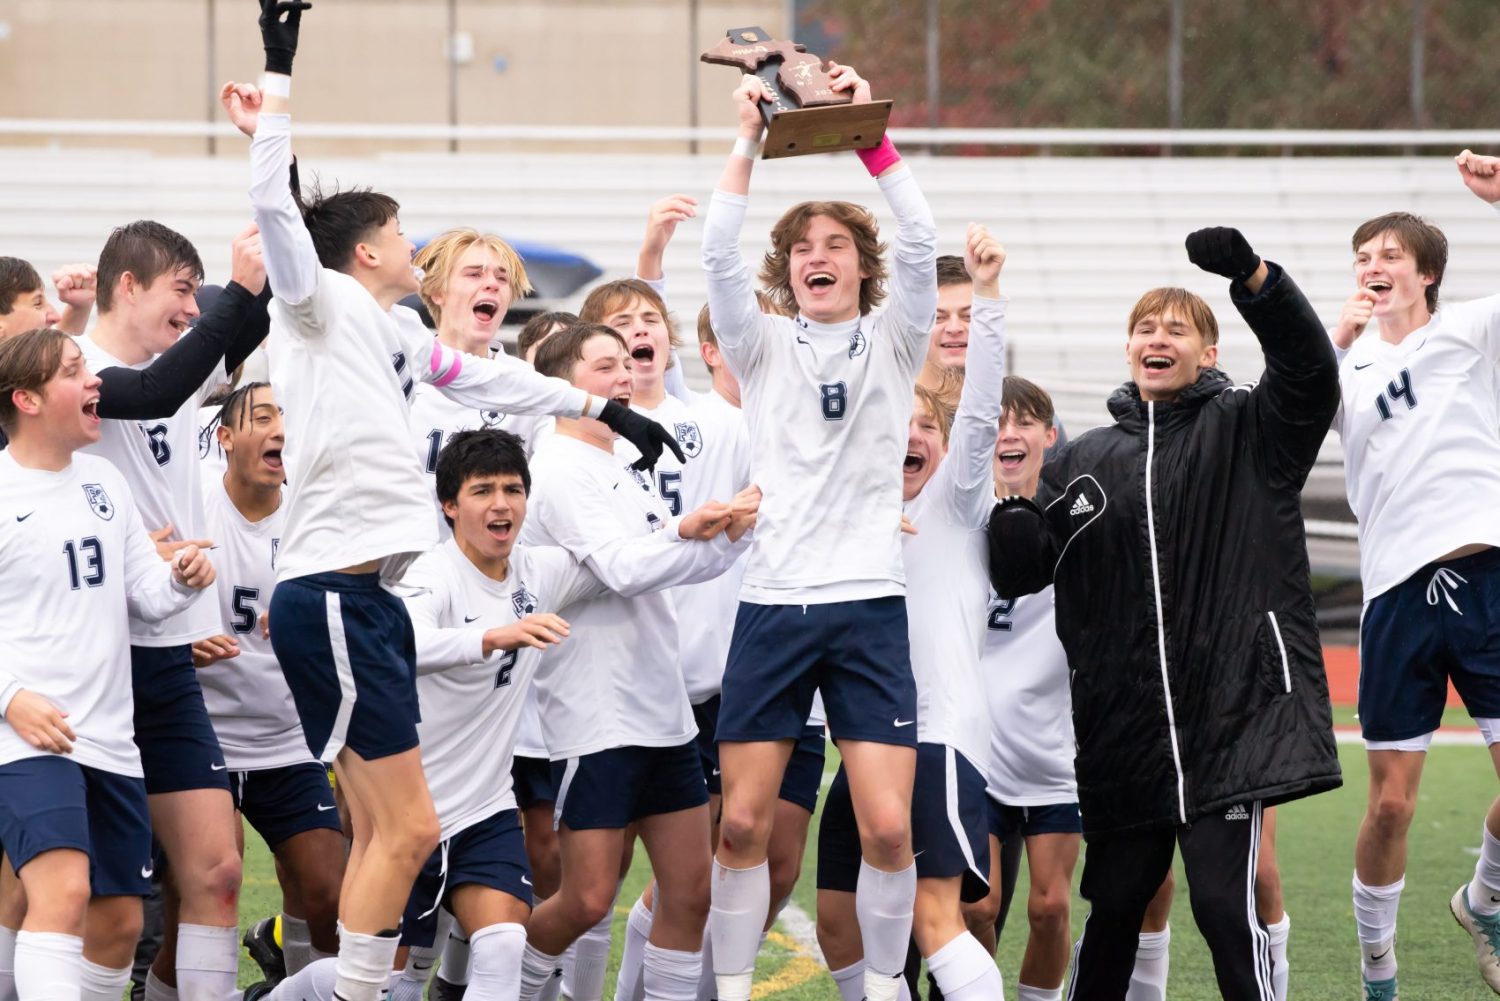 It’s another shutout for Fruitport soccer in district title victory over GR Northview